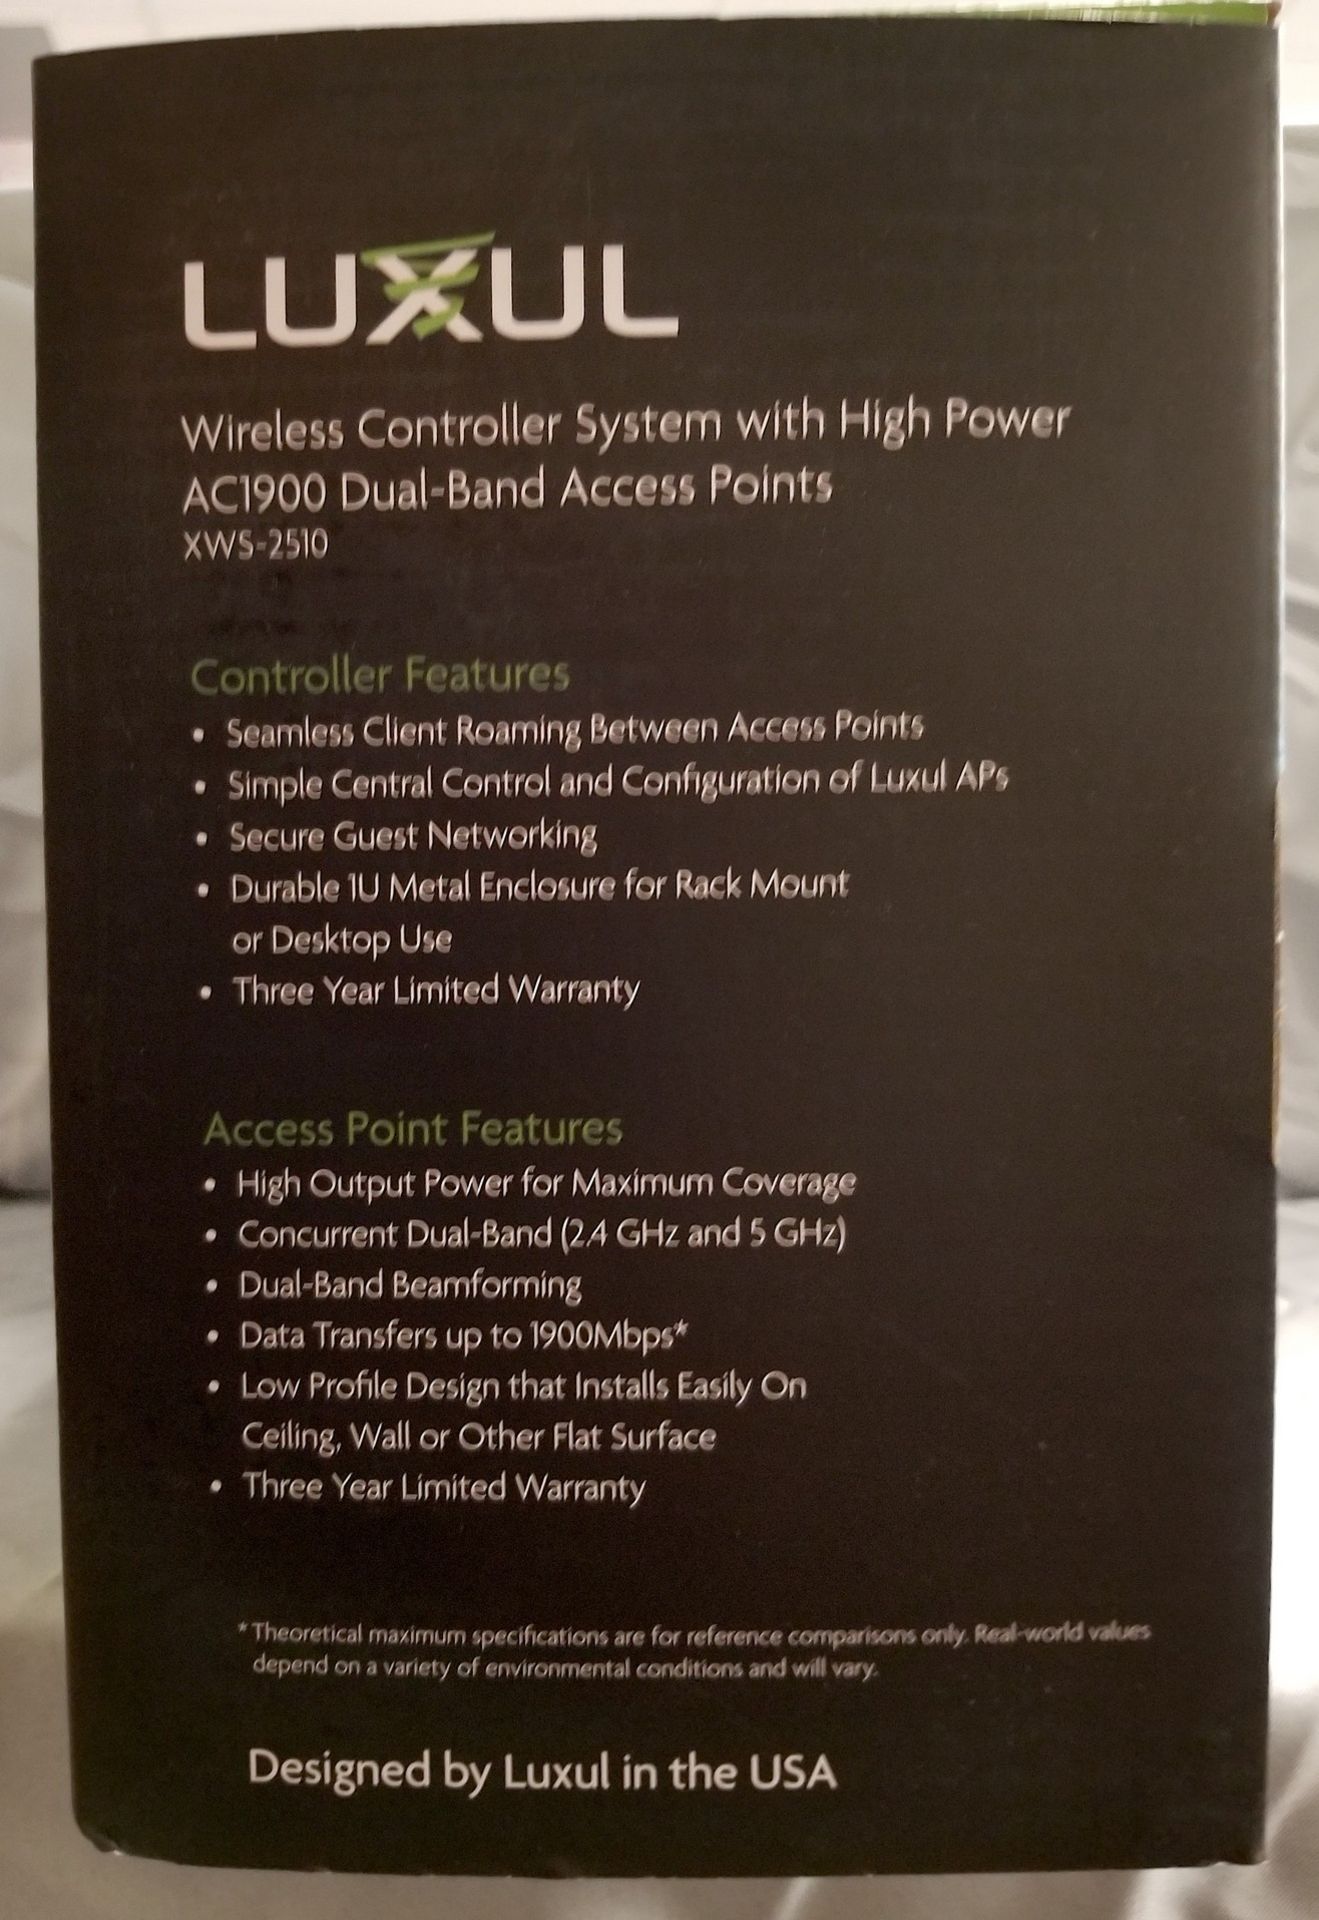 LUXUL, XWS-2510 WIRELESS CONTROLLER SYSTEM WITH HIGH POWER ACI900 DUAL-BAND ACCESS POINTS - (BNIB) - Image 2 of 3